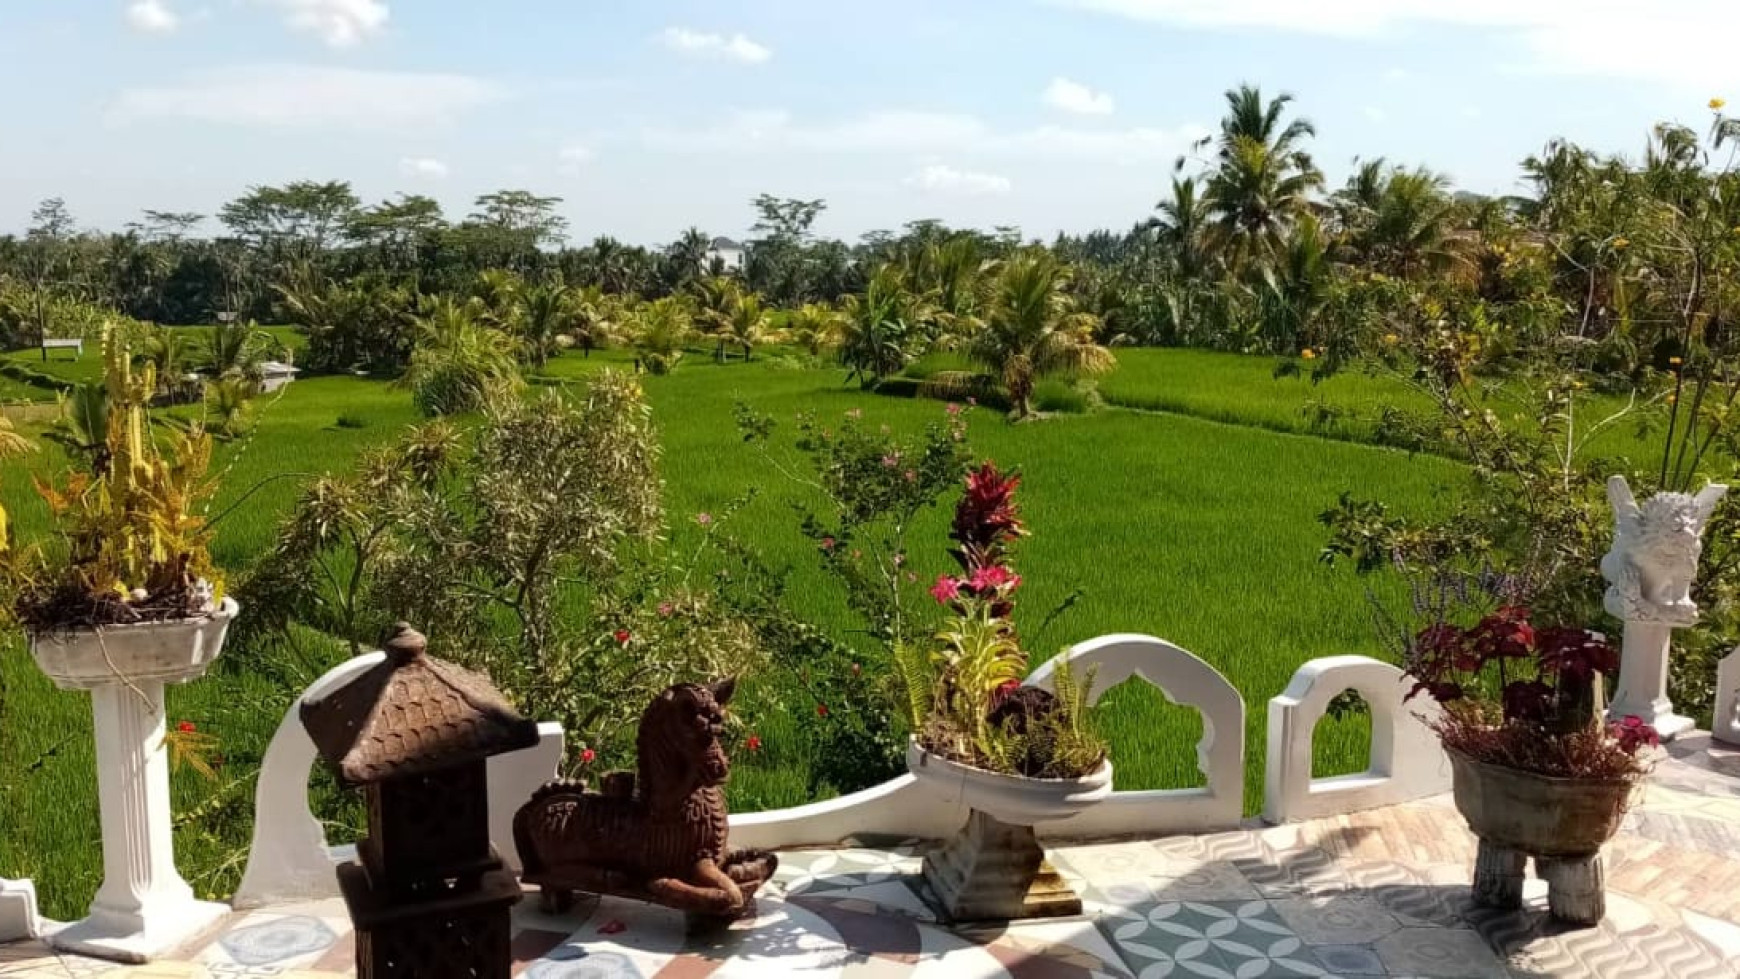 2 Bedroom Joglo Villa On 200 sqm of Leasehold Land with Amazing View For Sale, Located 15 Minutes From Ubud Center